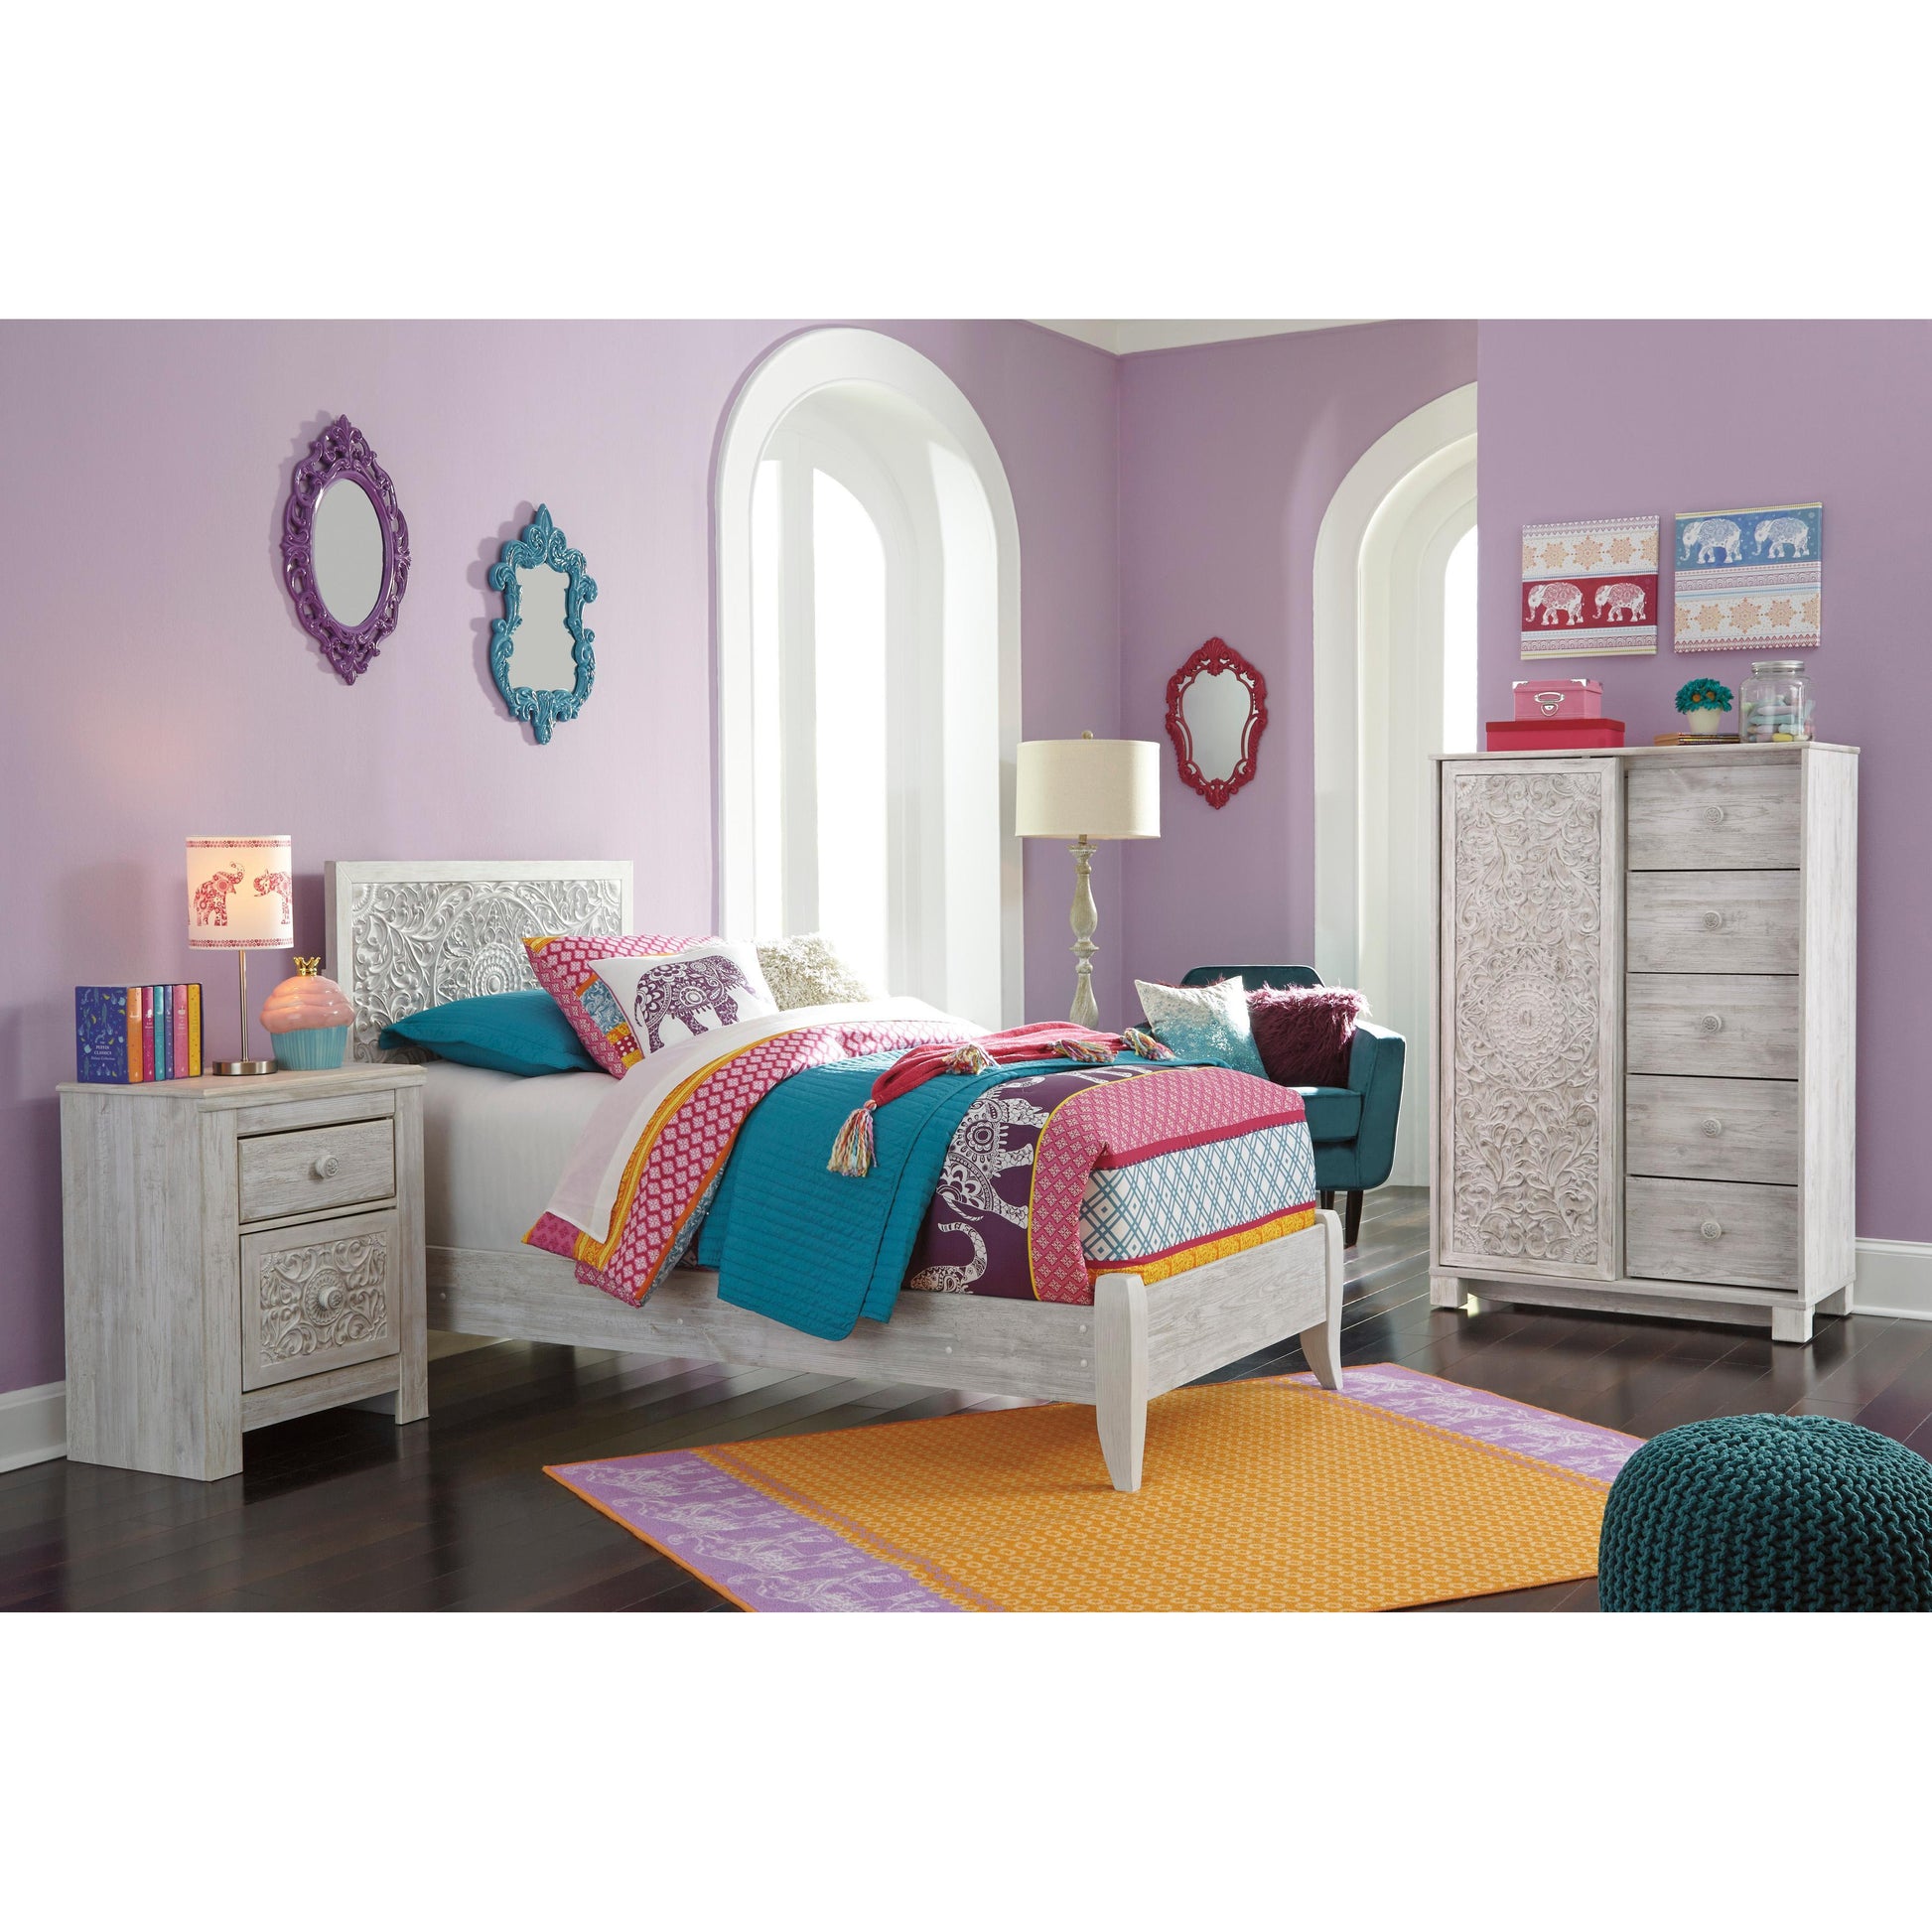 Signature Design by Ashley Paxberry B181B24 5 pc Twin Panel Bedroom Set IMAGE 1